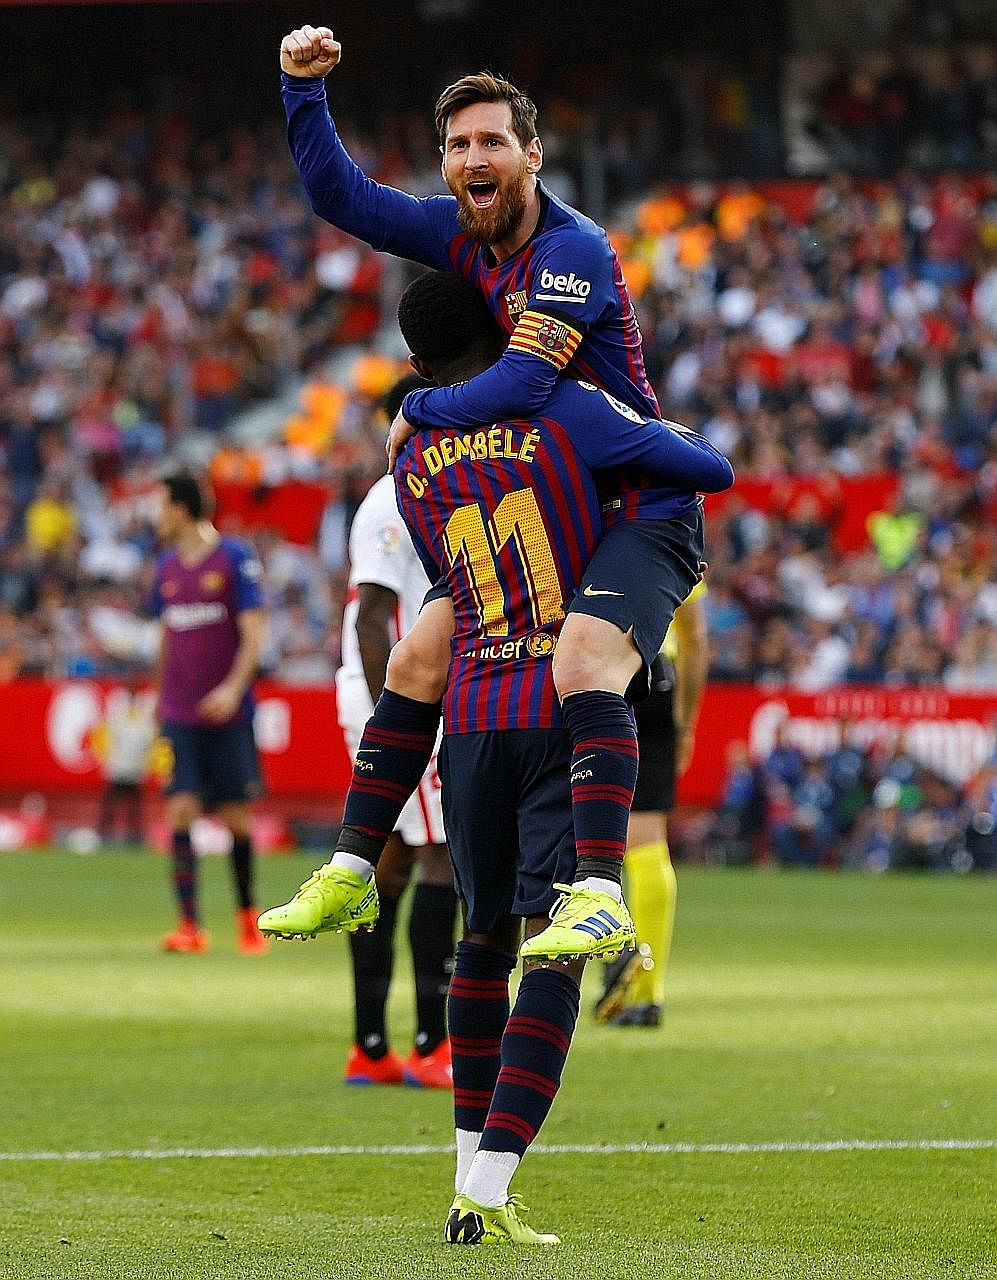 Ousmane Dembele giving Lionel Messi a lift after the Argentinian ace equalised for Barcelona for the second time at Sevilla on Saturday. The Catalans won 4-2 and topped the standings by 10 points before last night's games.